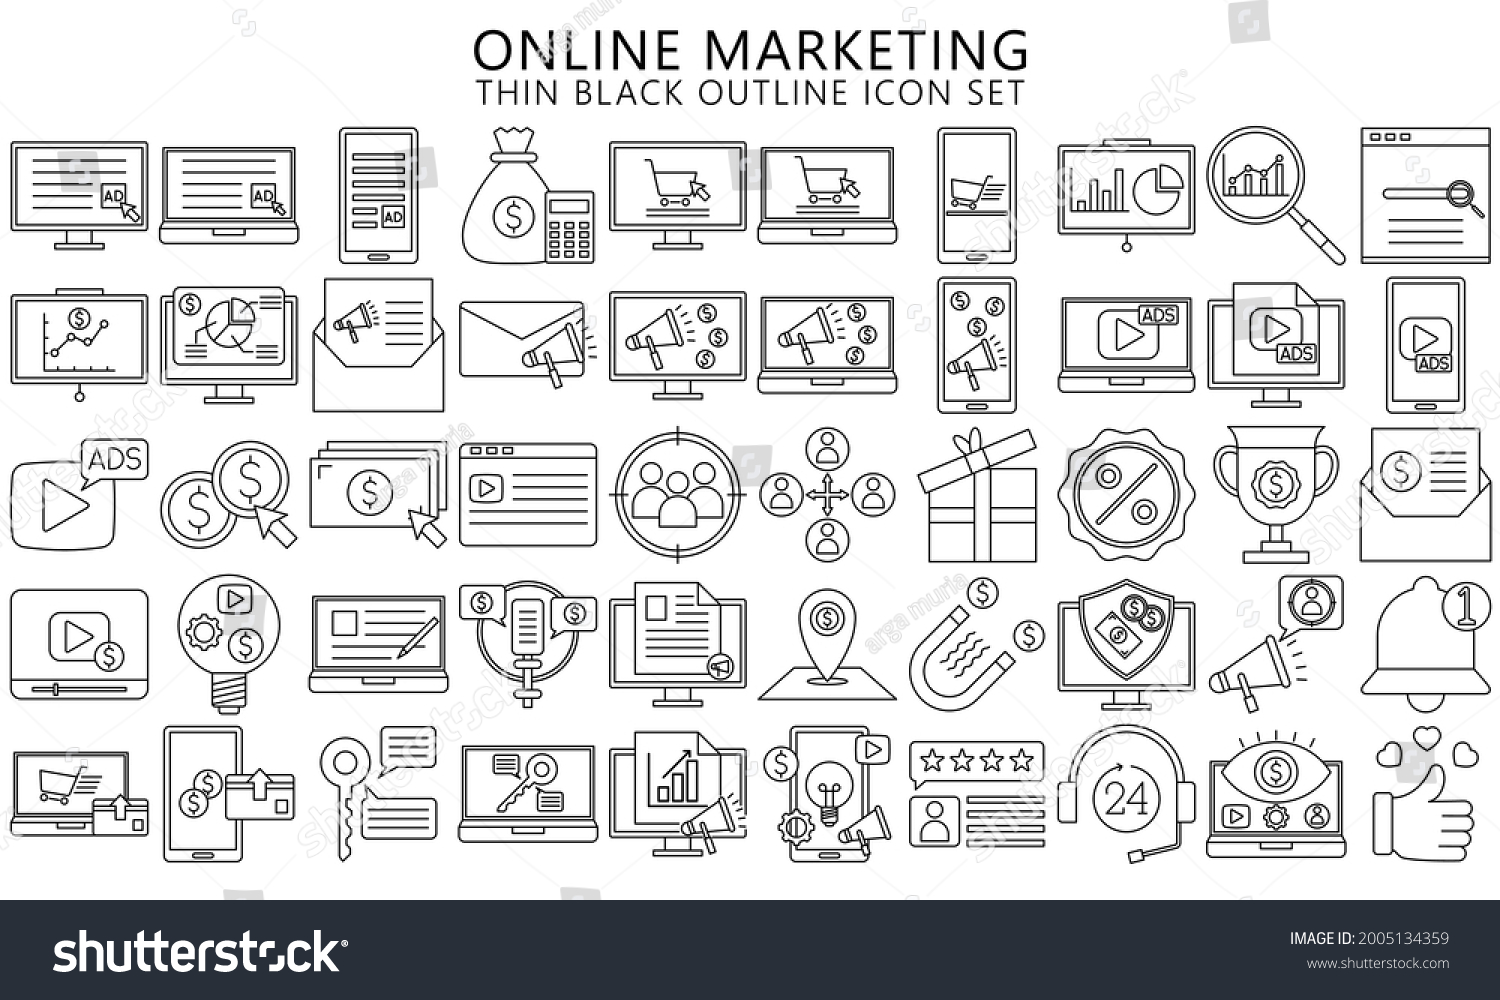 SVG of Online marketing icons thin black outline set, contain such as computer, handphone, diagram, finance symbol, offers. Used for modern concepts, web, and applications. EPS 10 ready to convert to SVG svg